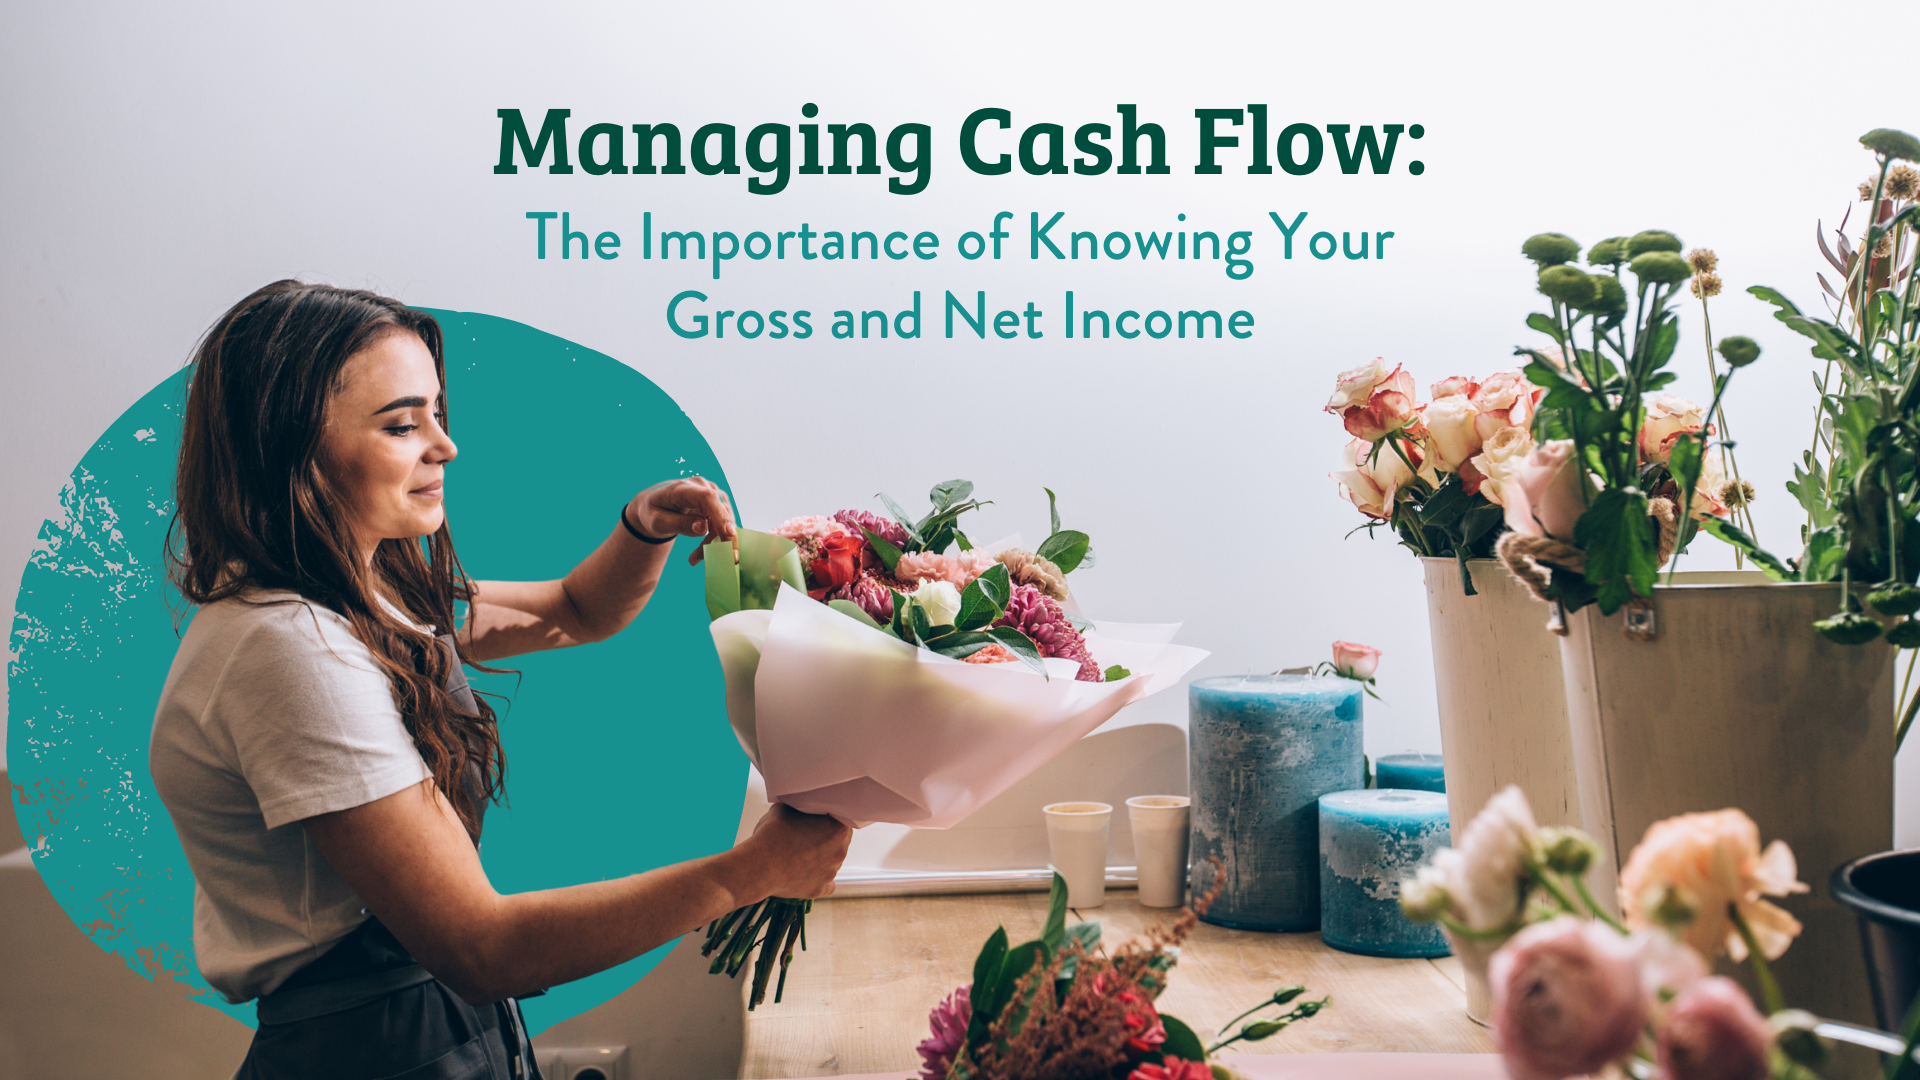 Managing Cash Flow: The Importance of Knowing Your Gross and Net Income